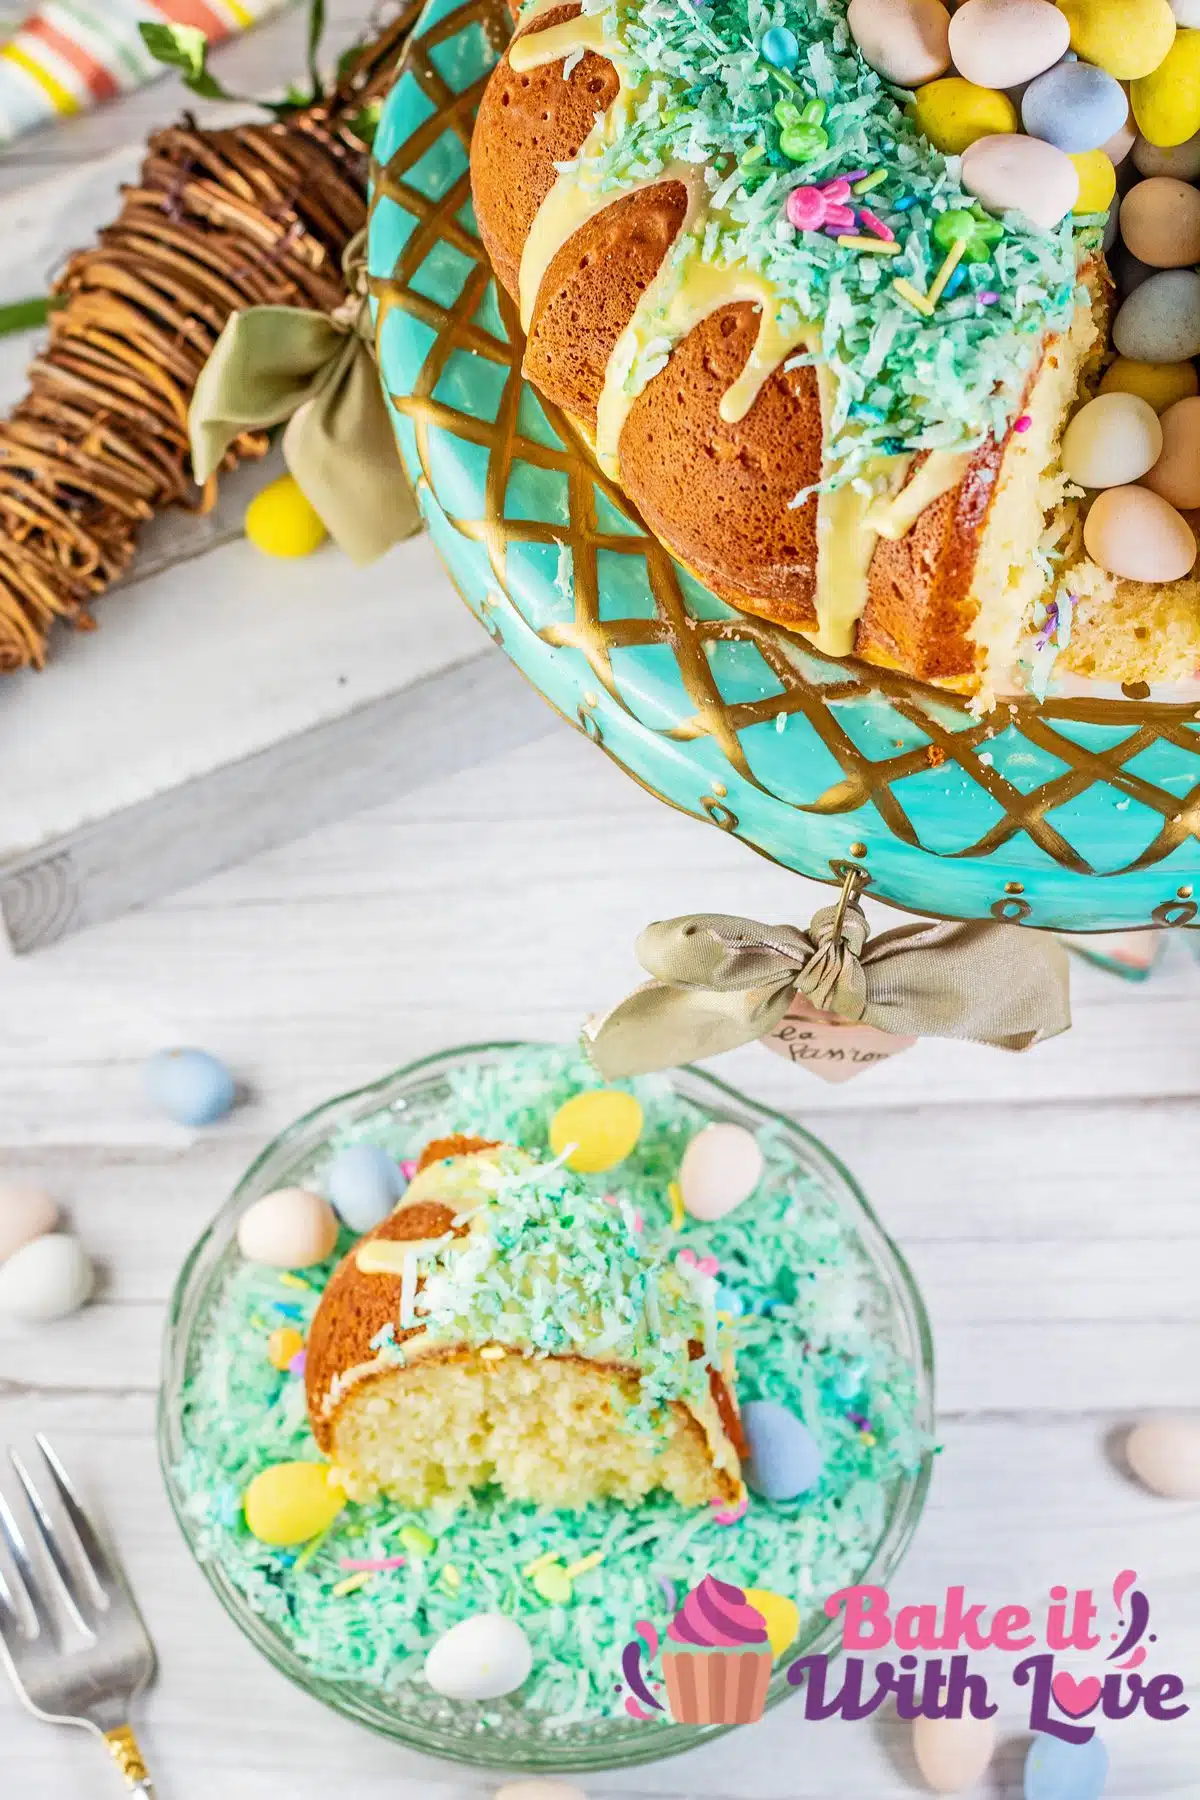 Easter mini egg cake sliced and served on clear glass plate in a bed of the green colored shredded sweetened coconut.